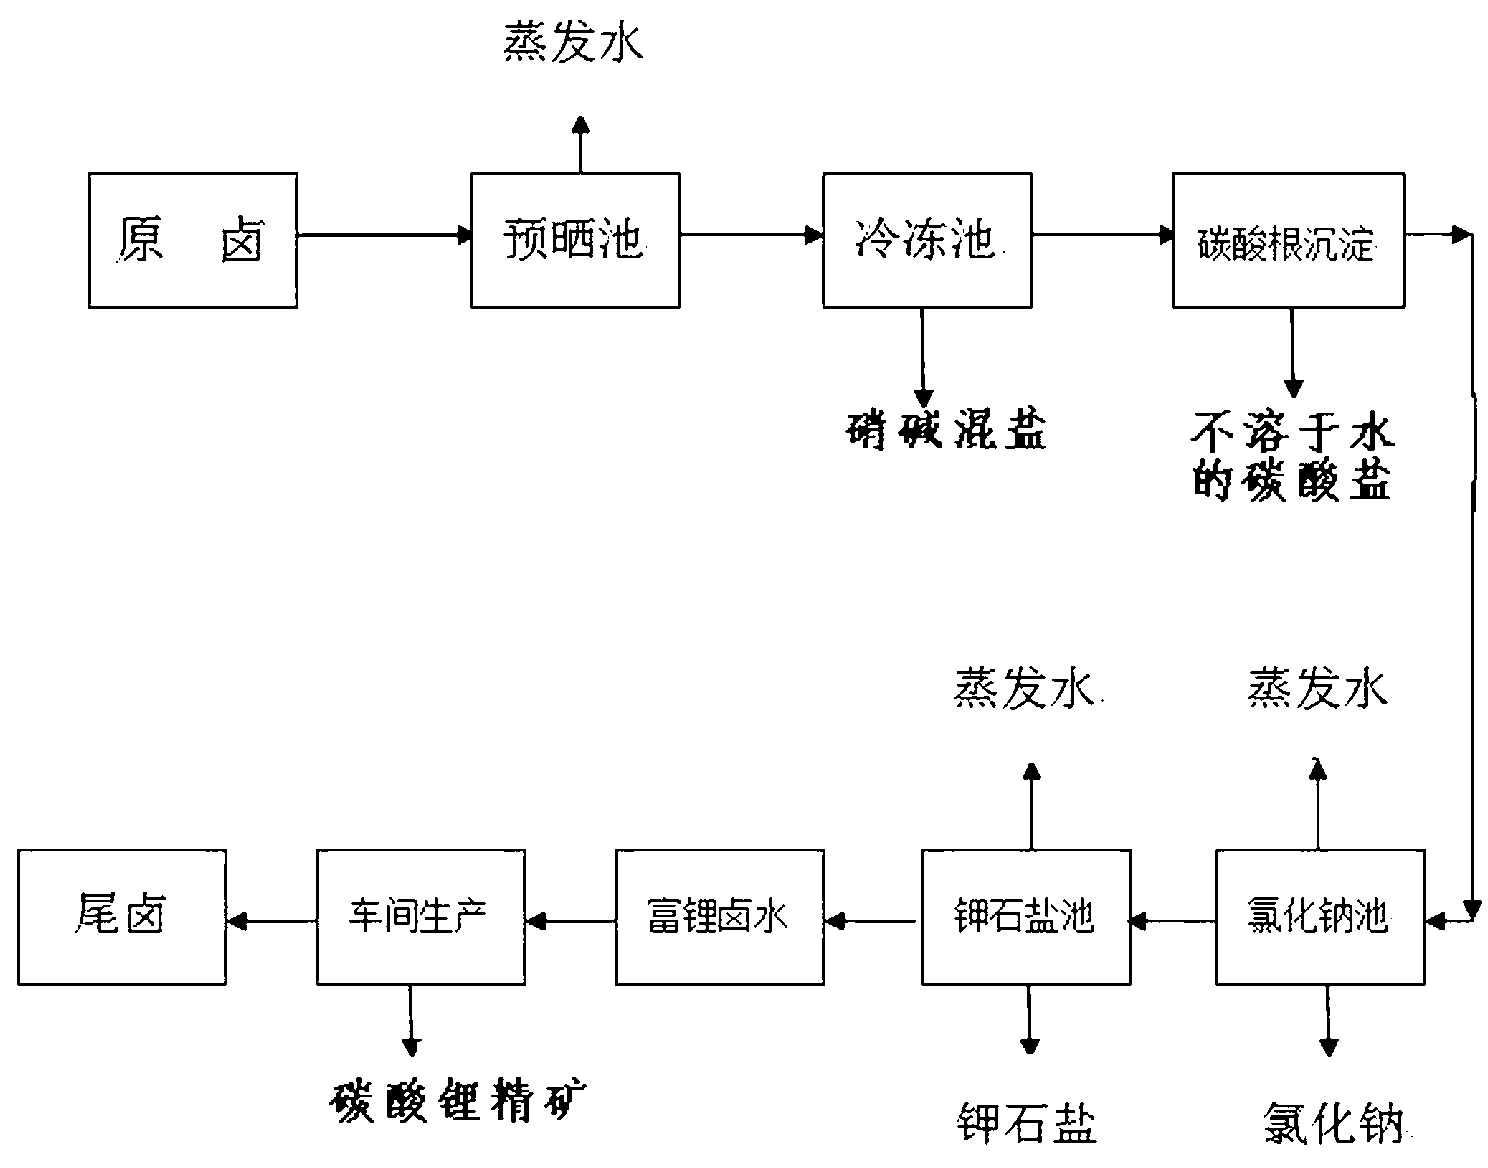 Method for separating carbonate from carbonate bittern containing lithium and potassium to prepare sylvinite ore and lithium carbonate concentrate